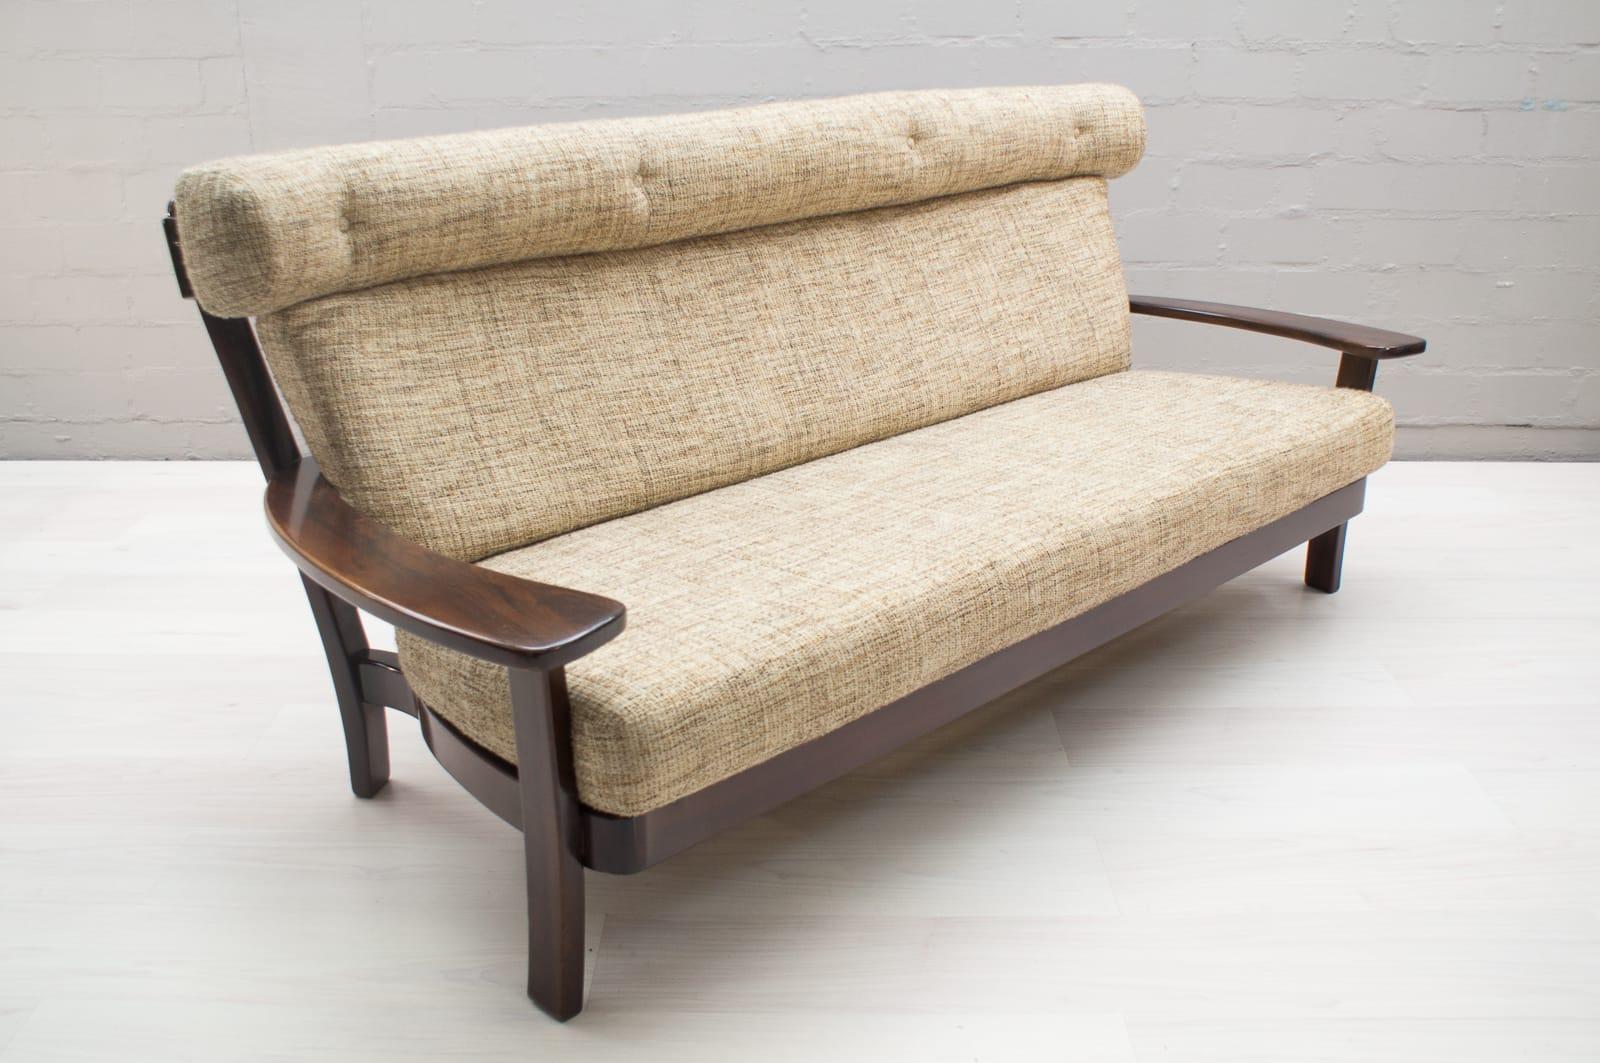 Fabric Large Brazilian Sofa in the Manner of Sergio Rodrigues, 1960s For Sale